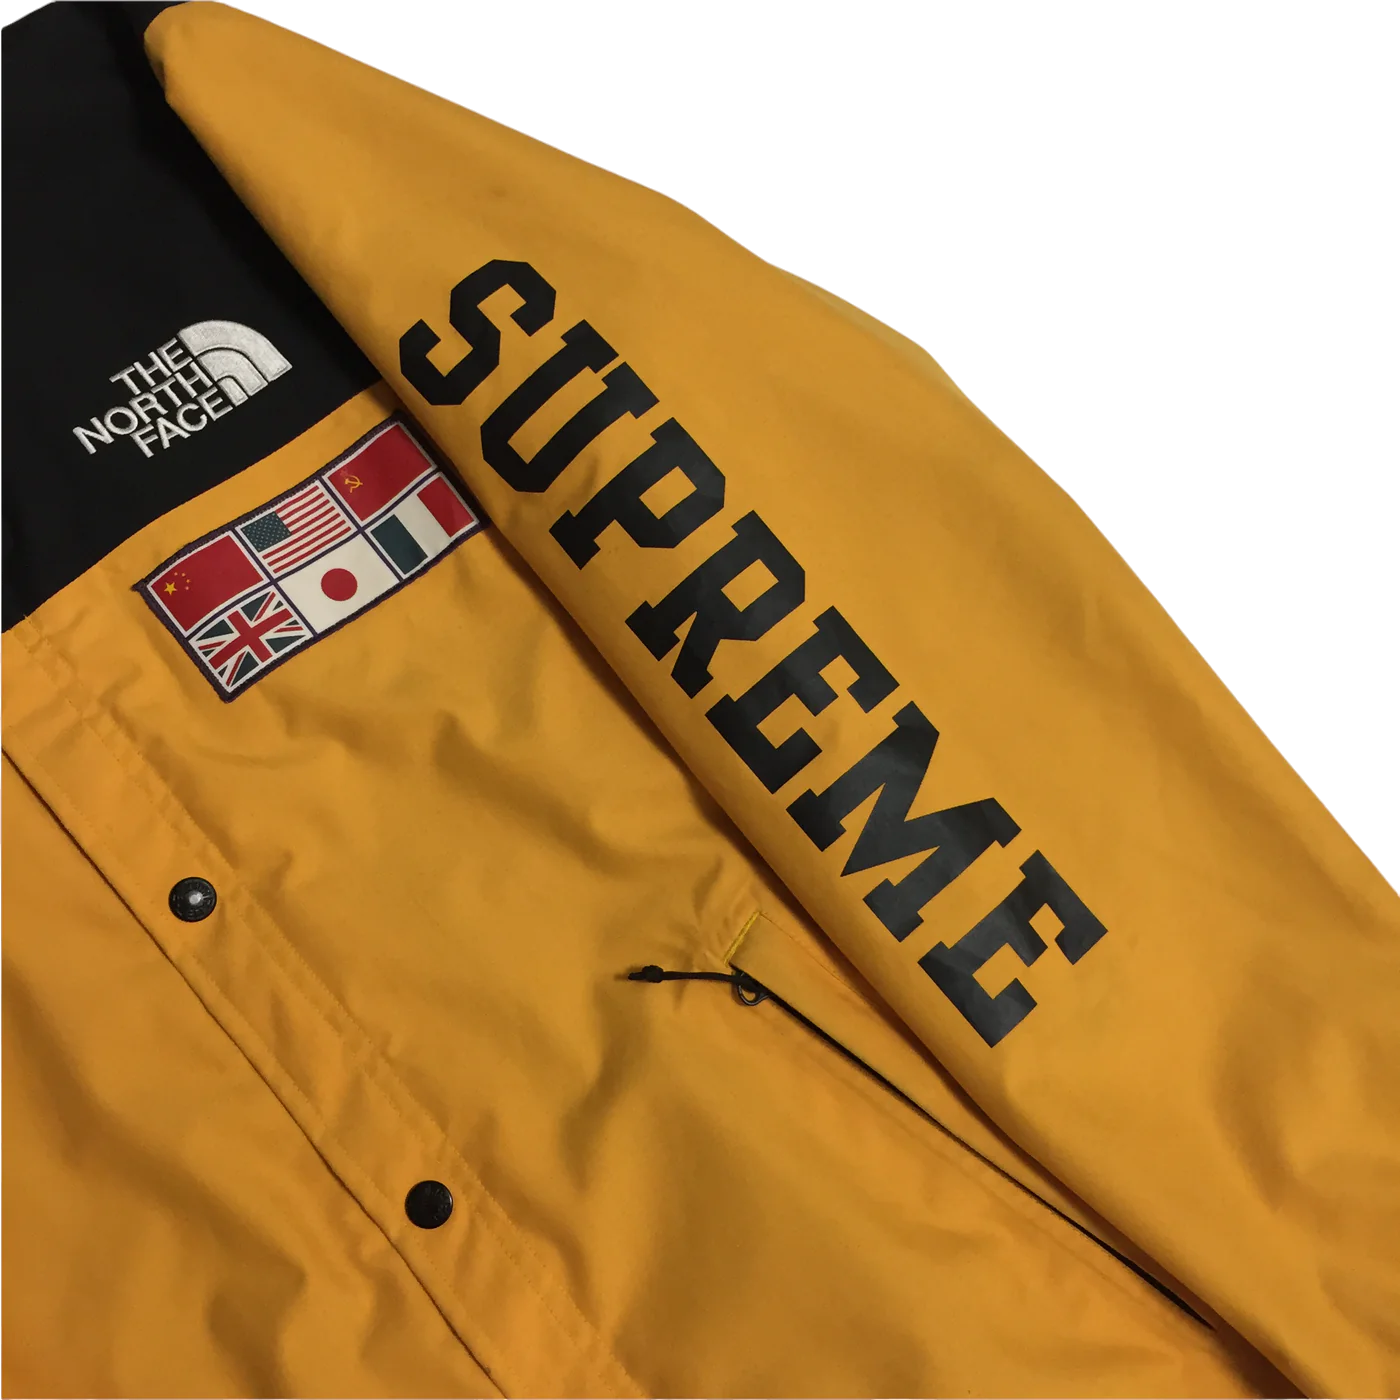 2014 Supreme x The North Face Yellow Expedition Coach